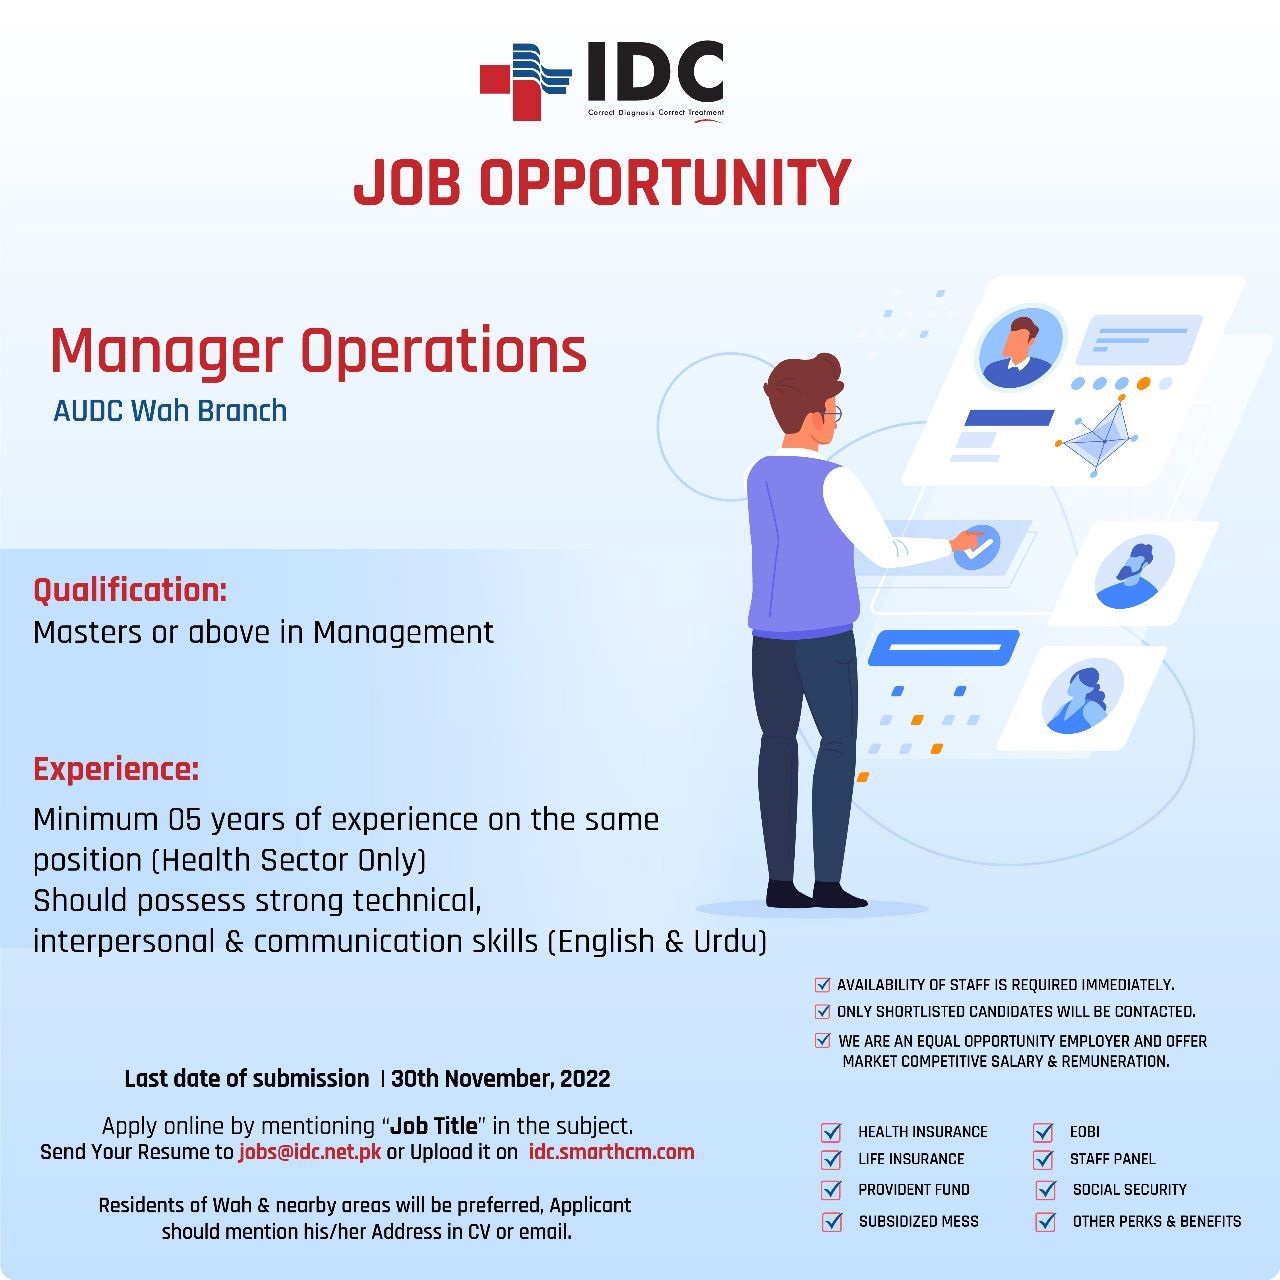 Islamabad Diagnostic Centre IDC Pvt Ltd Announced Jobs for Manager Operations & Supervisor Lab